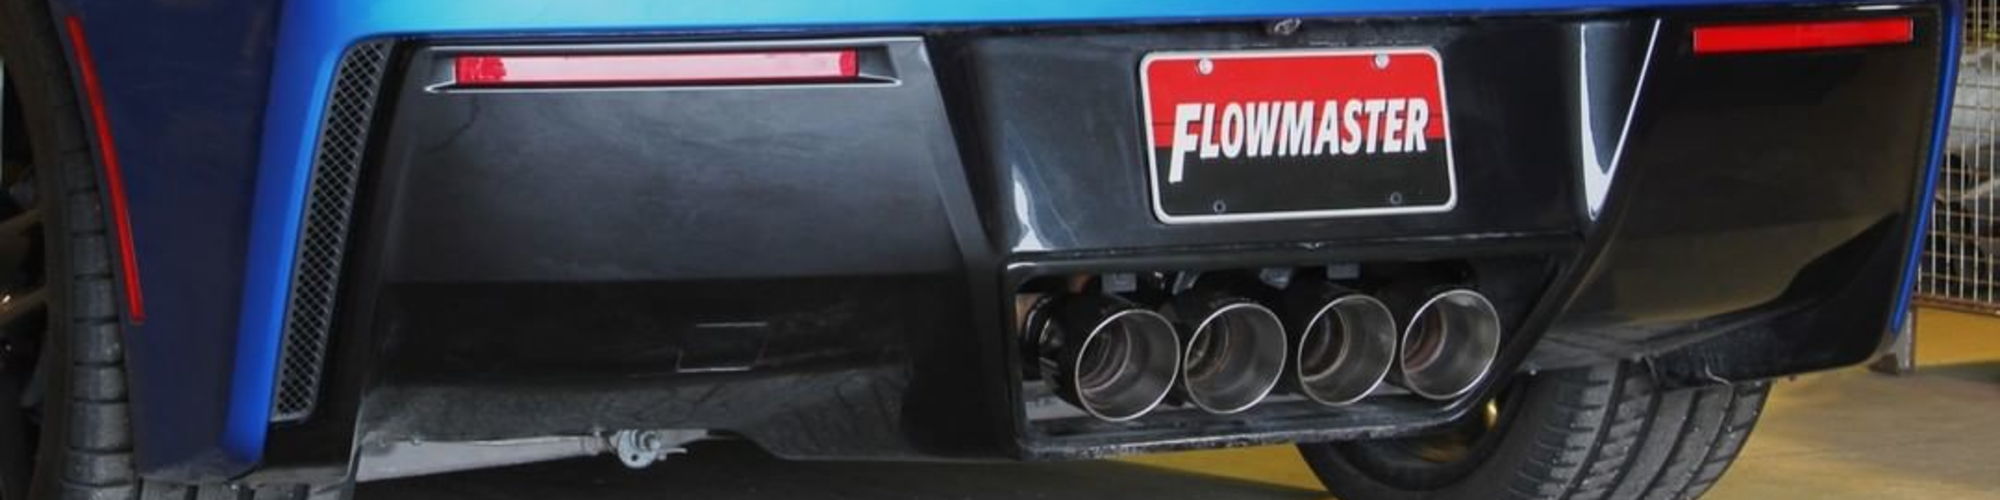 Flowmaster Mufflers cover image